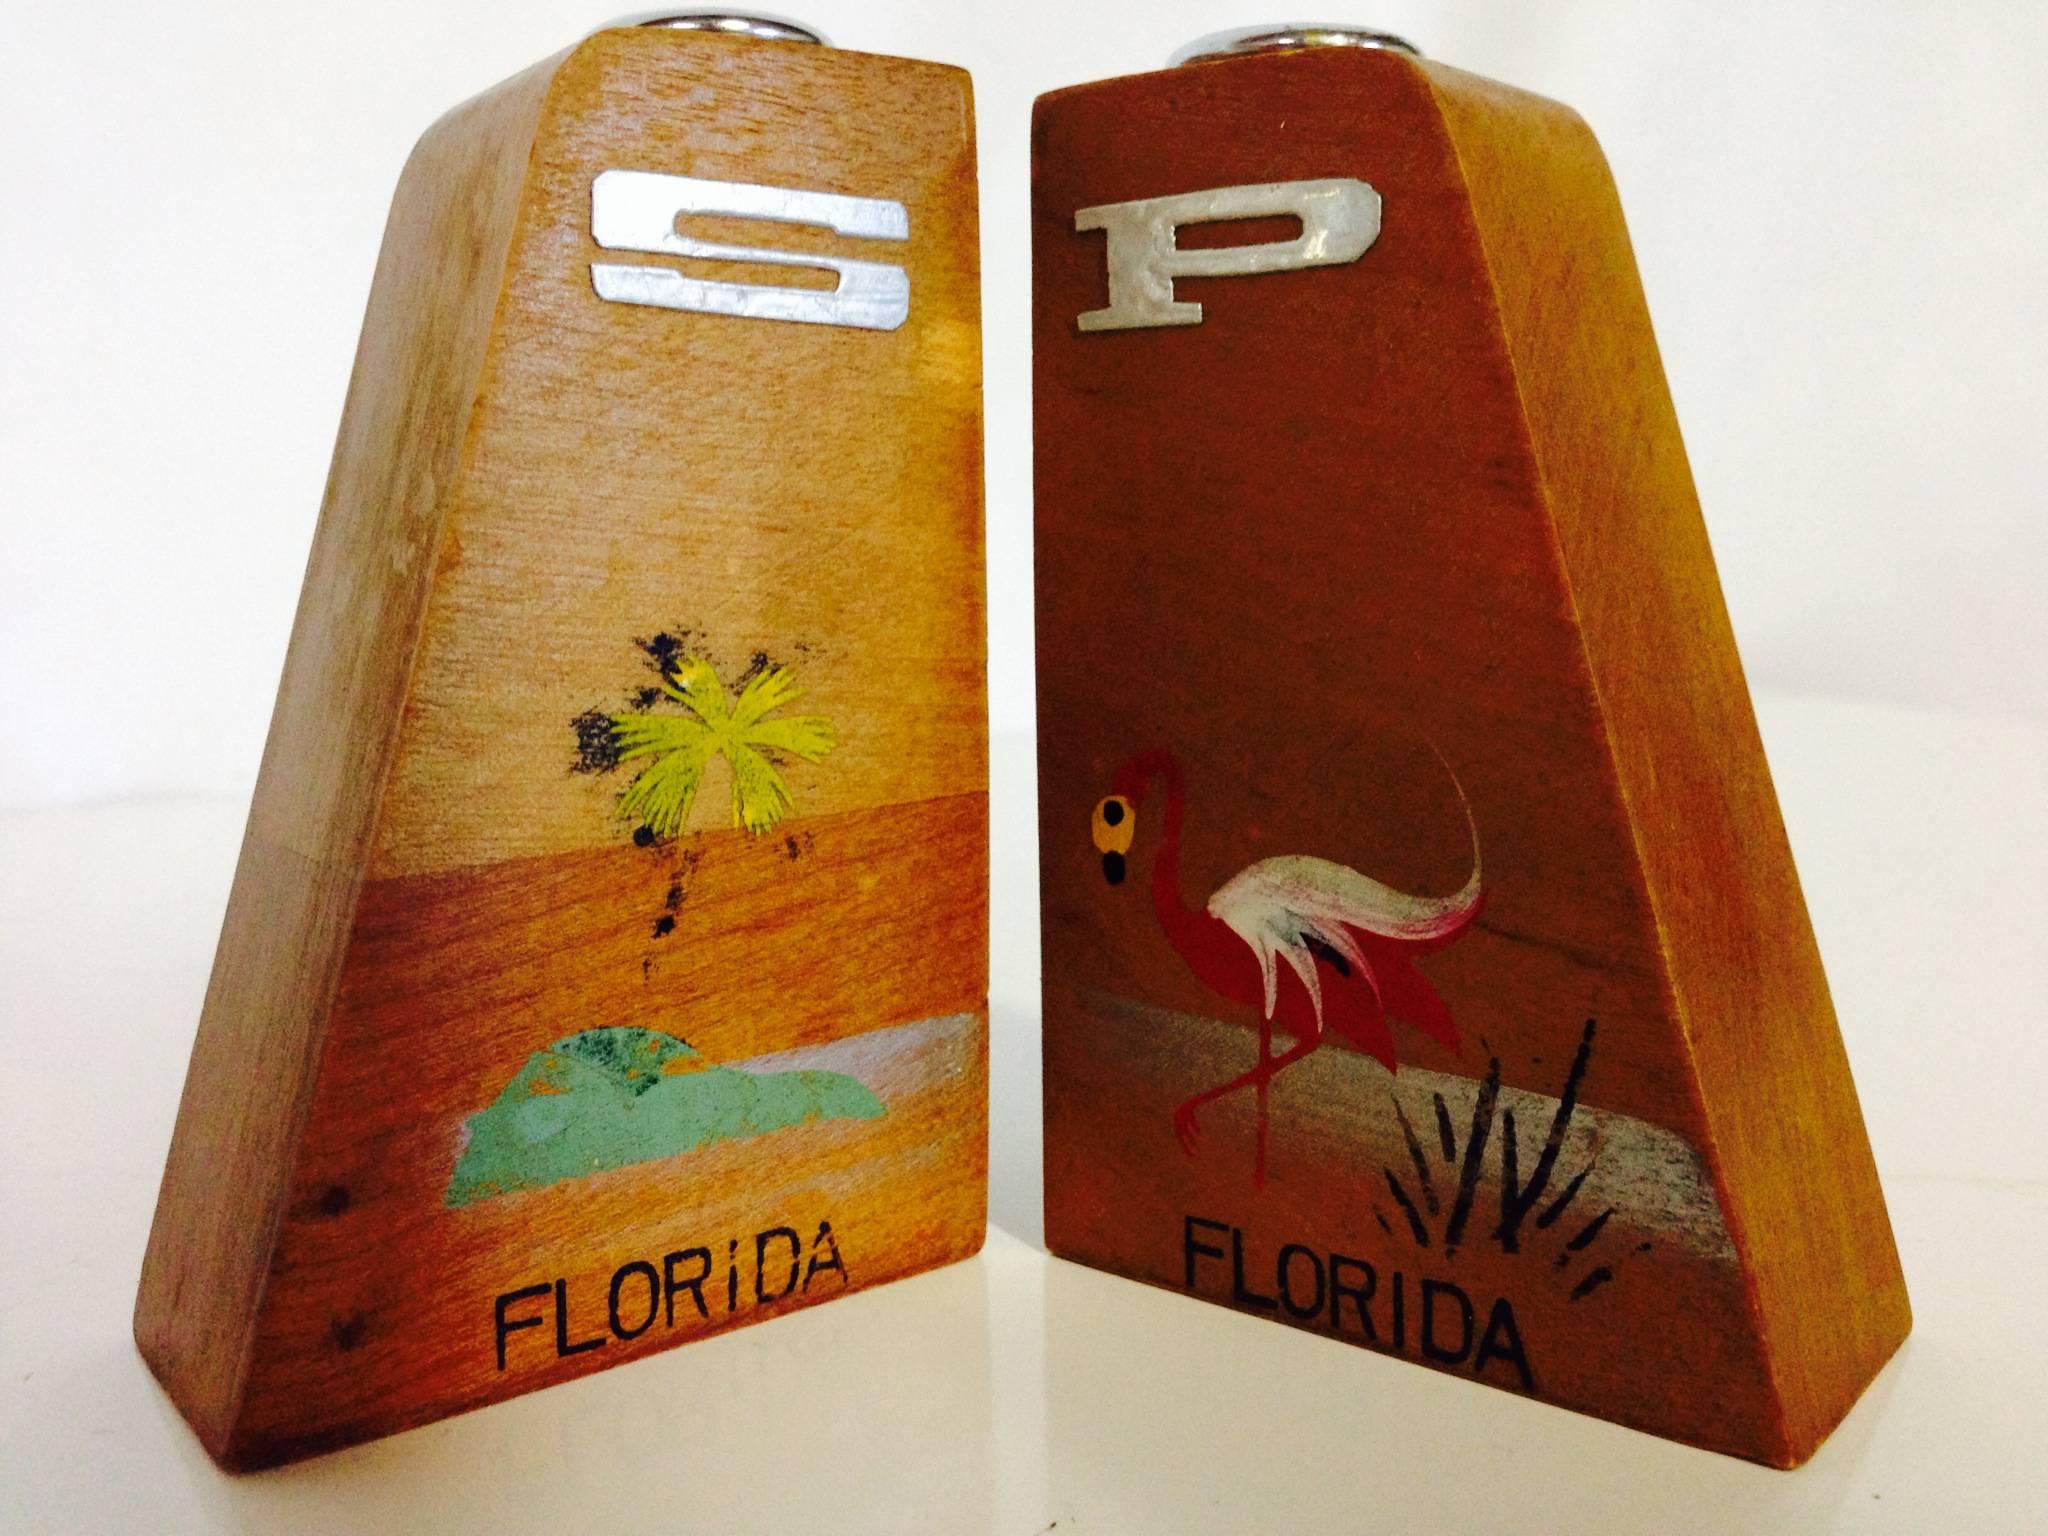 Adorable Mid-Century hand-painted teak with silver chrome S&P tops salt and pepper shakers. Features a Florida theme of a flamingo and palm tree.

